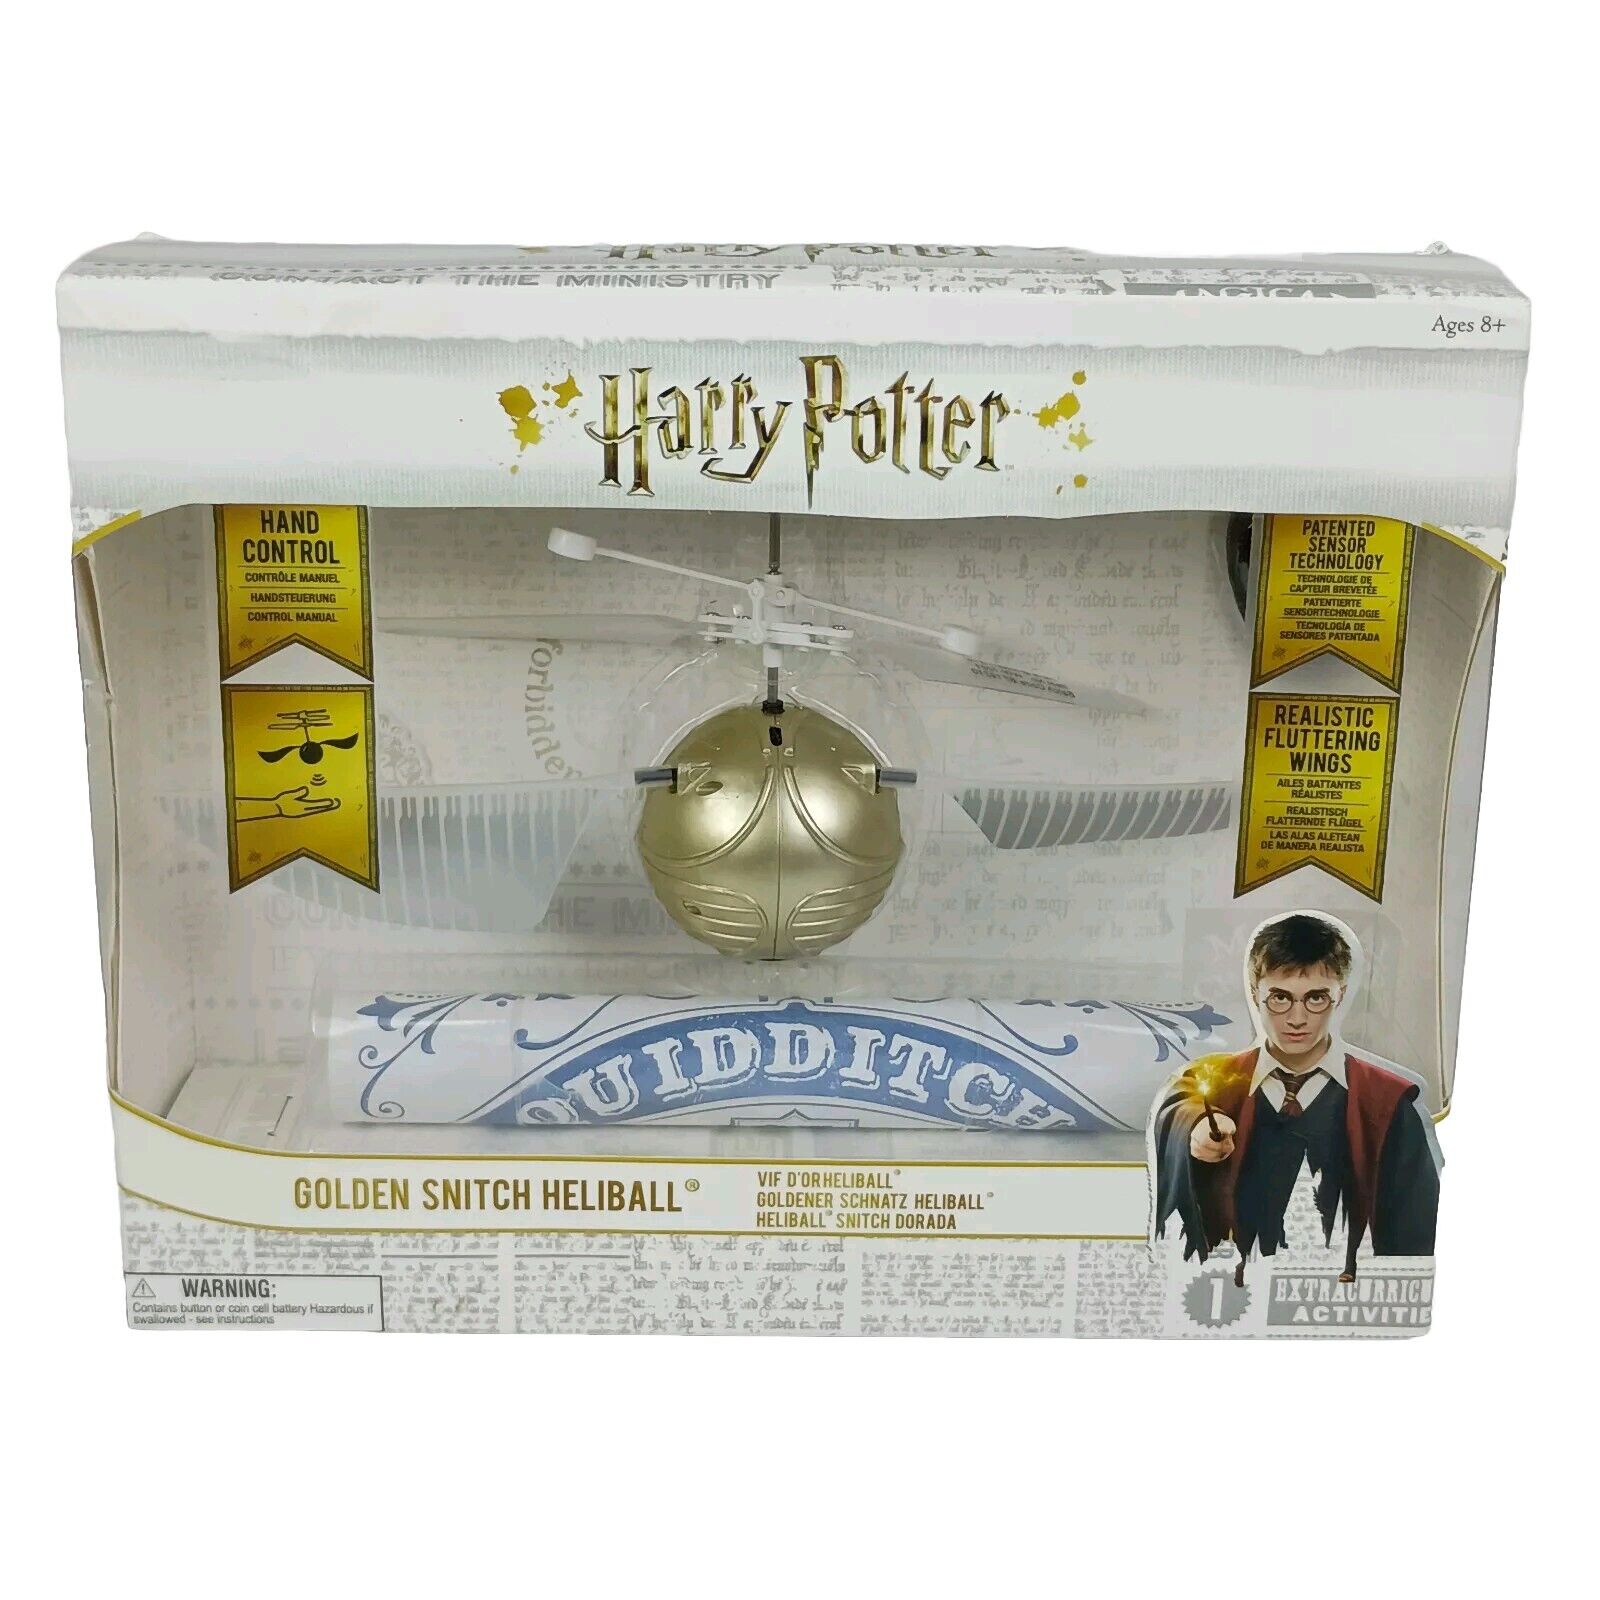 Harry Potter Golden Snitch Heliball Toy Hand Control with Fluttering Wings NEW